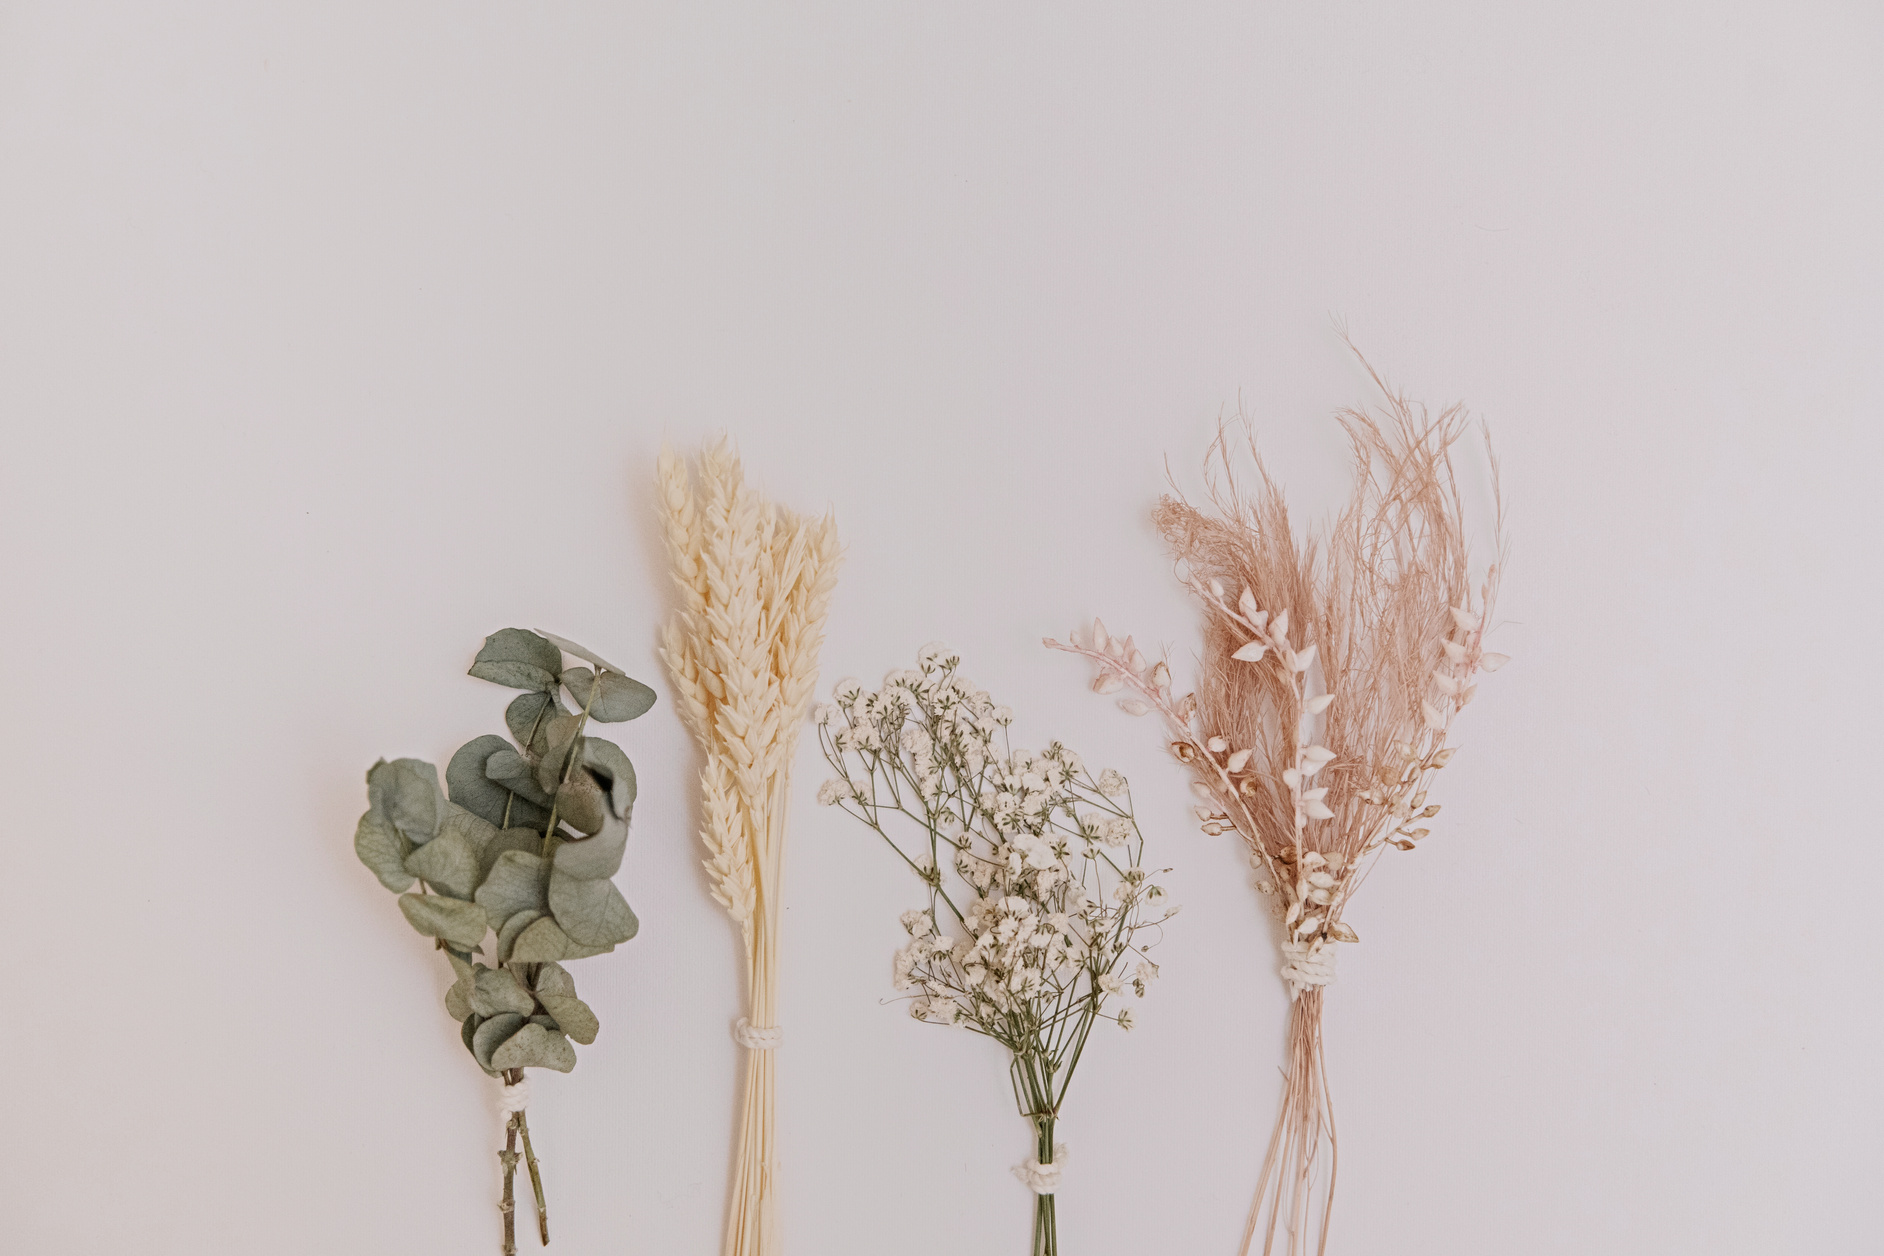 Dried Leaves and Flowers on Light Background